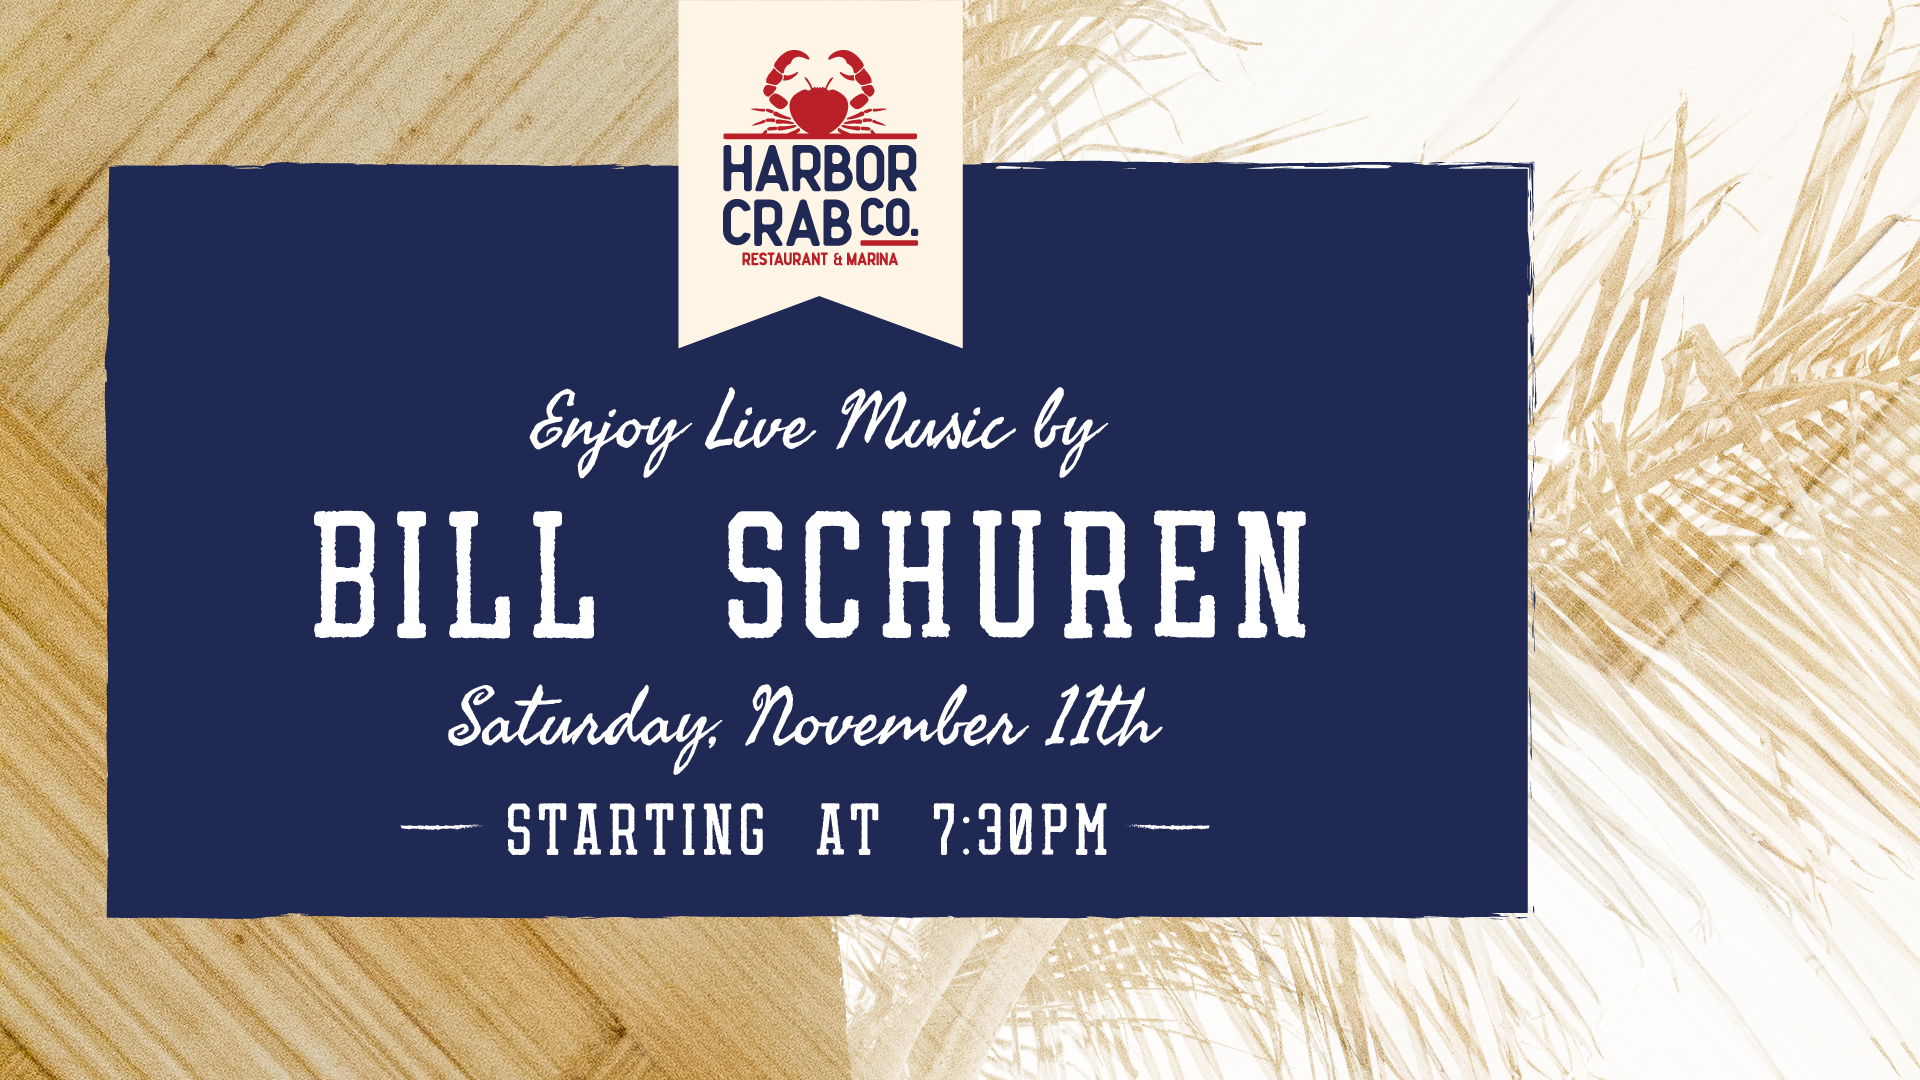 Live music with Bill Schuren on Saturday, November 11th at 7:30pm